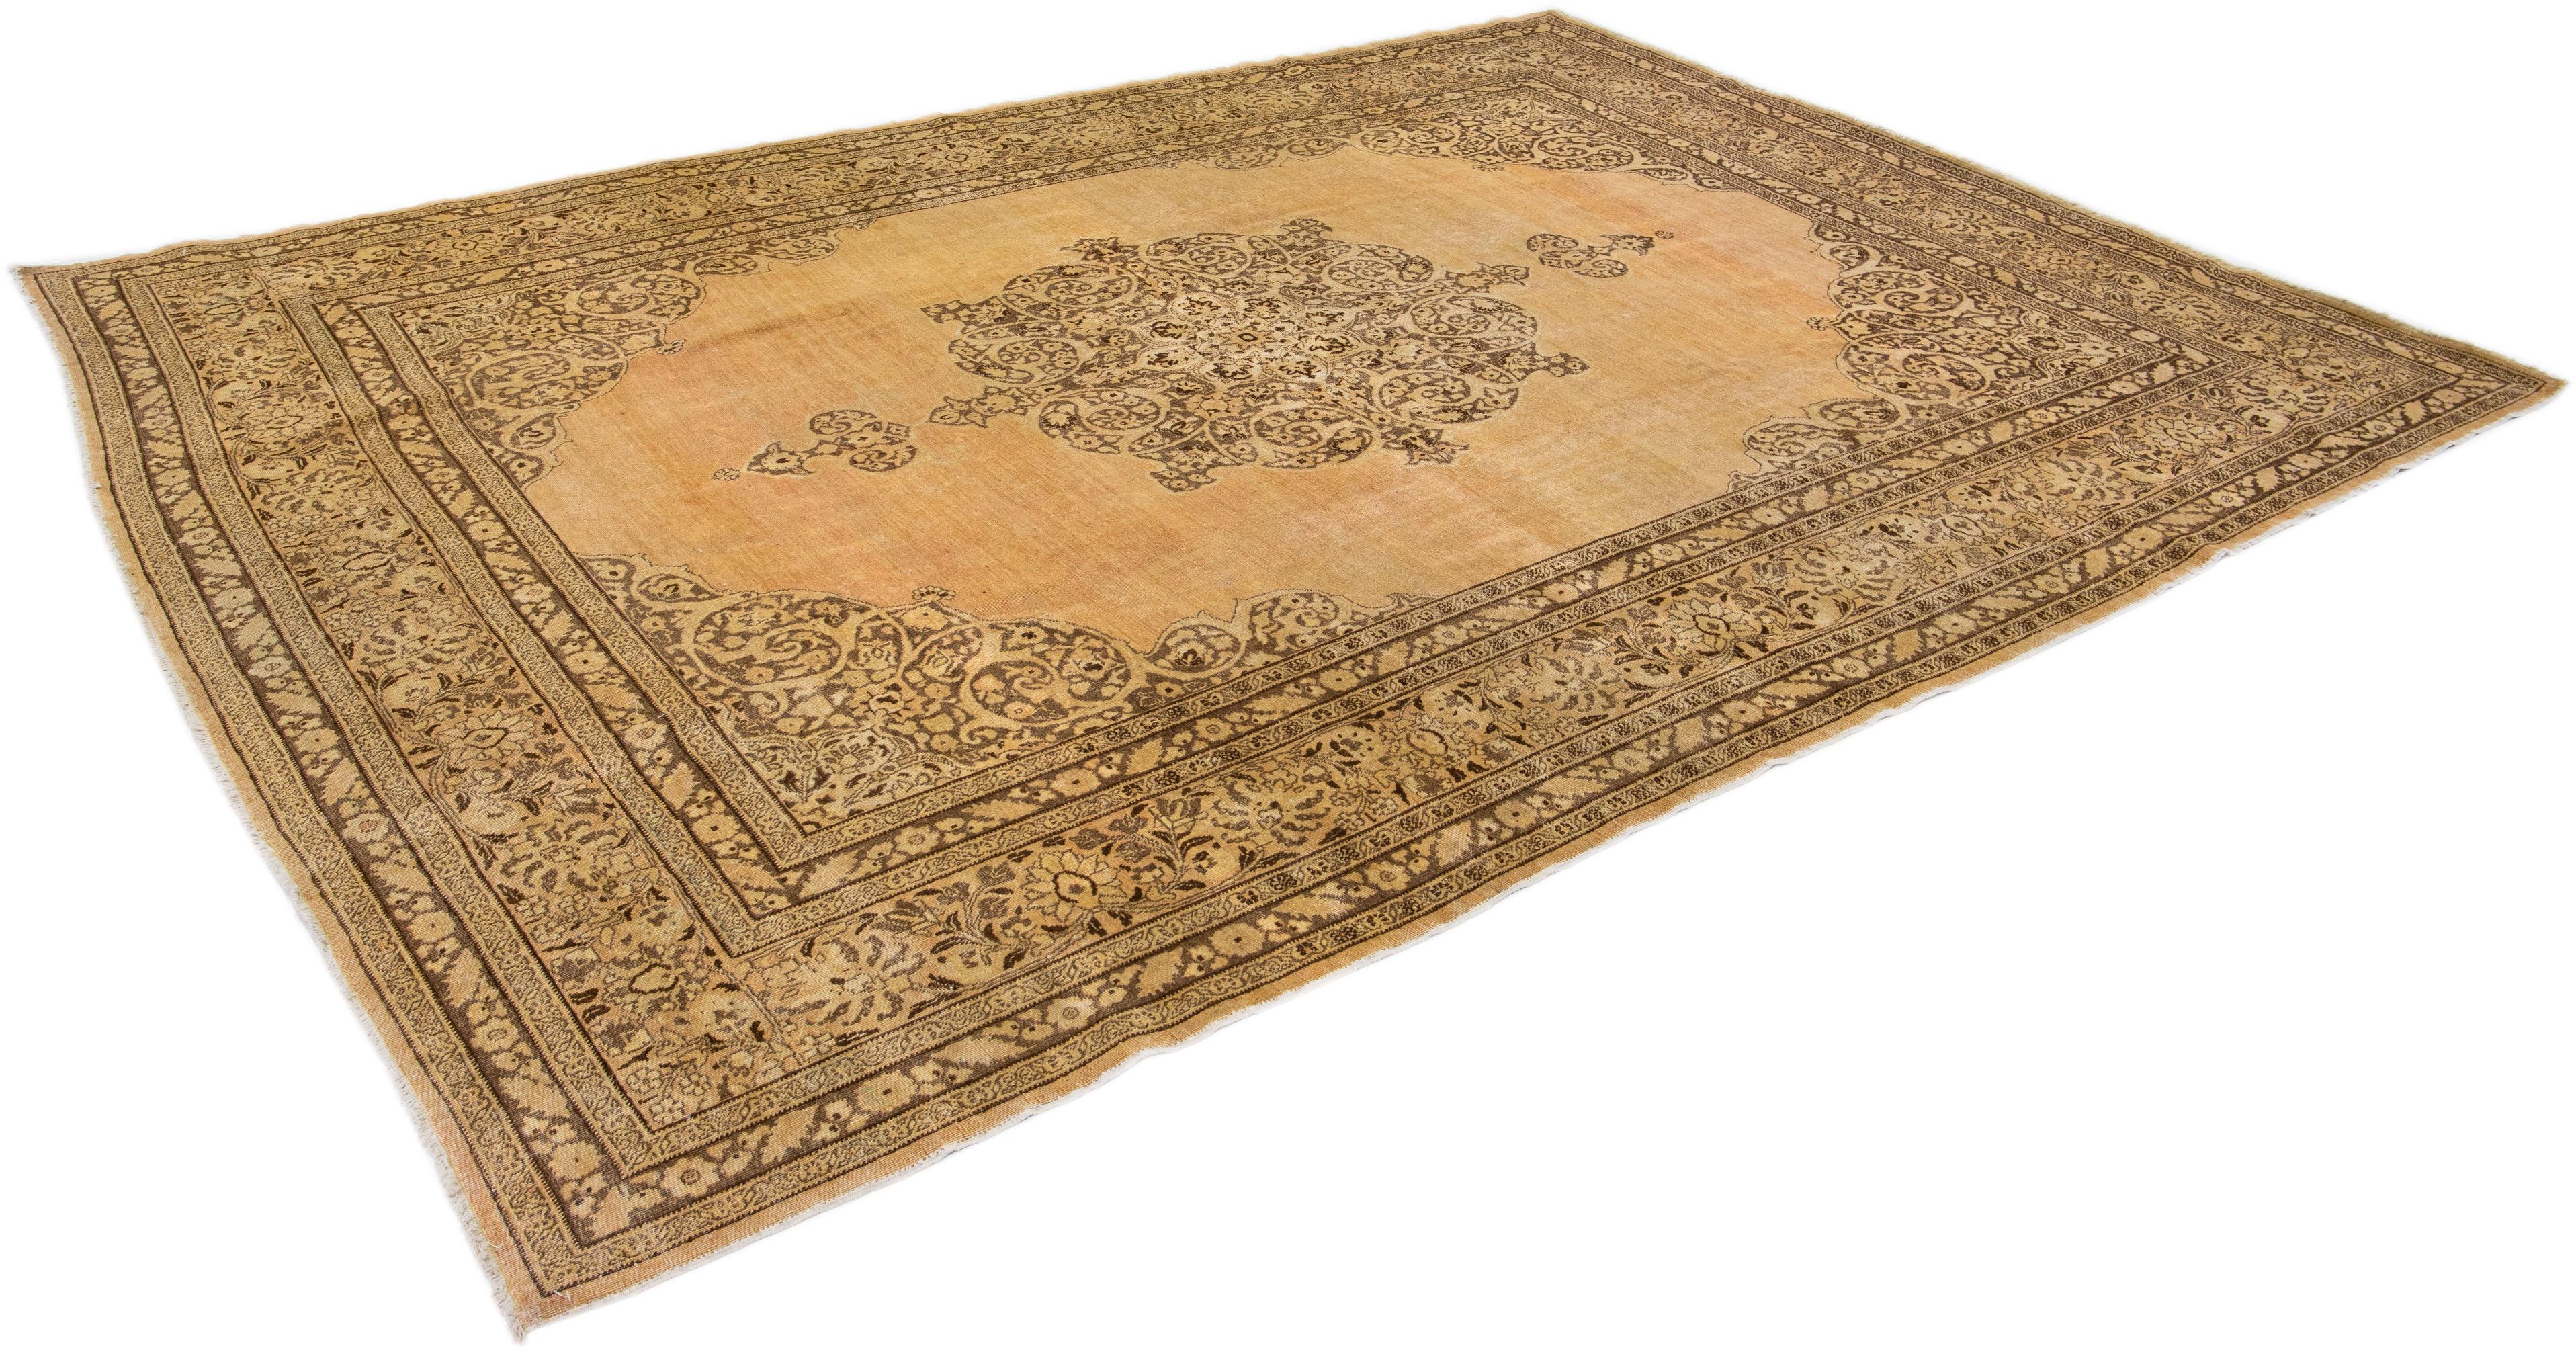 Tan Handmade Antique Persian Tabriz Wool Rug with Medallion Motif In Good Condition For Sale In Norwalk, CT